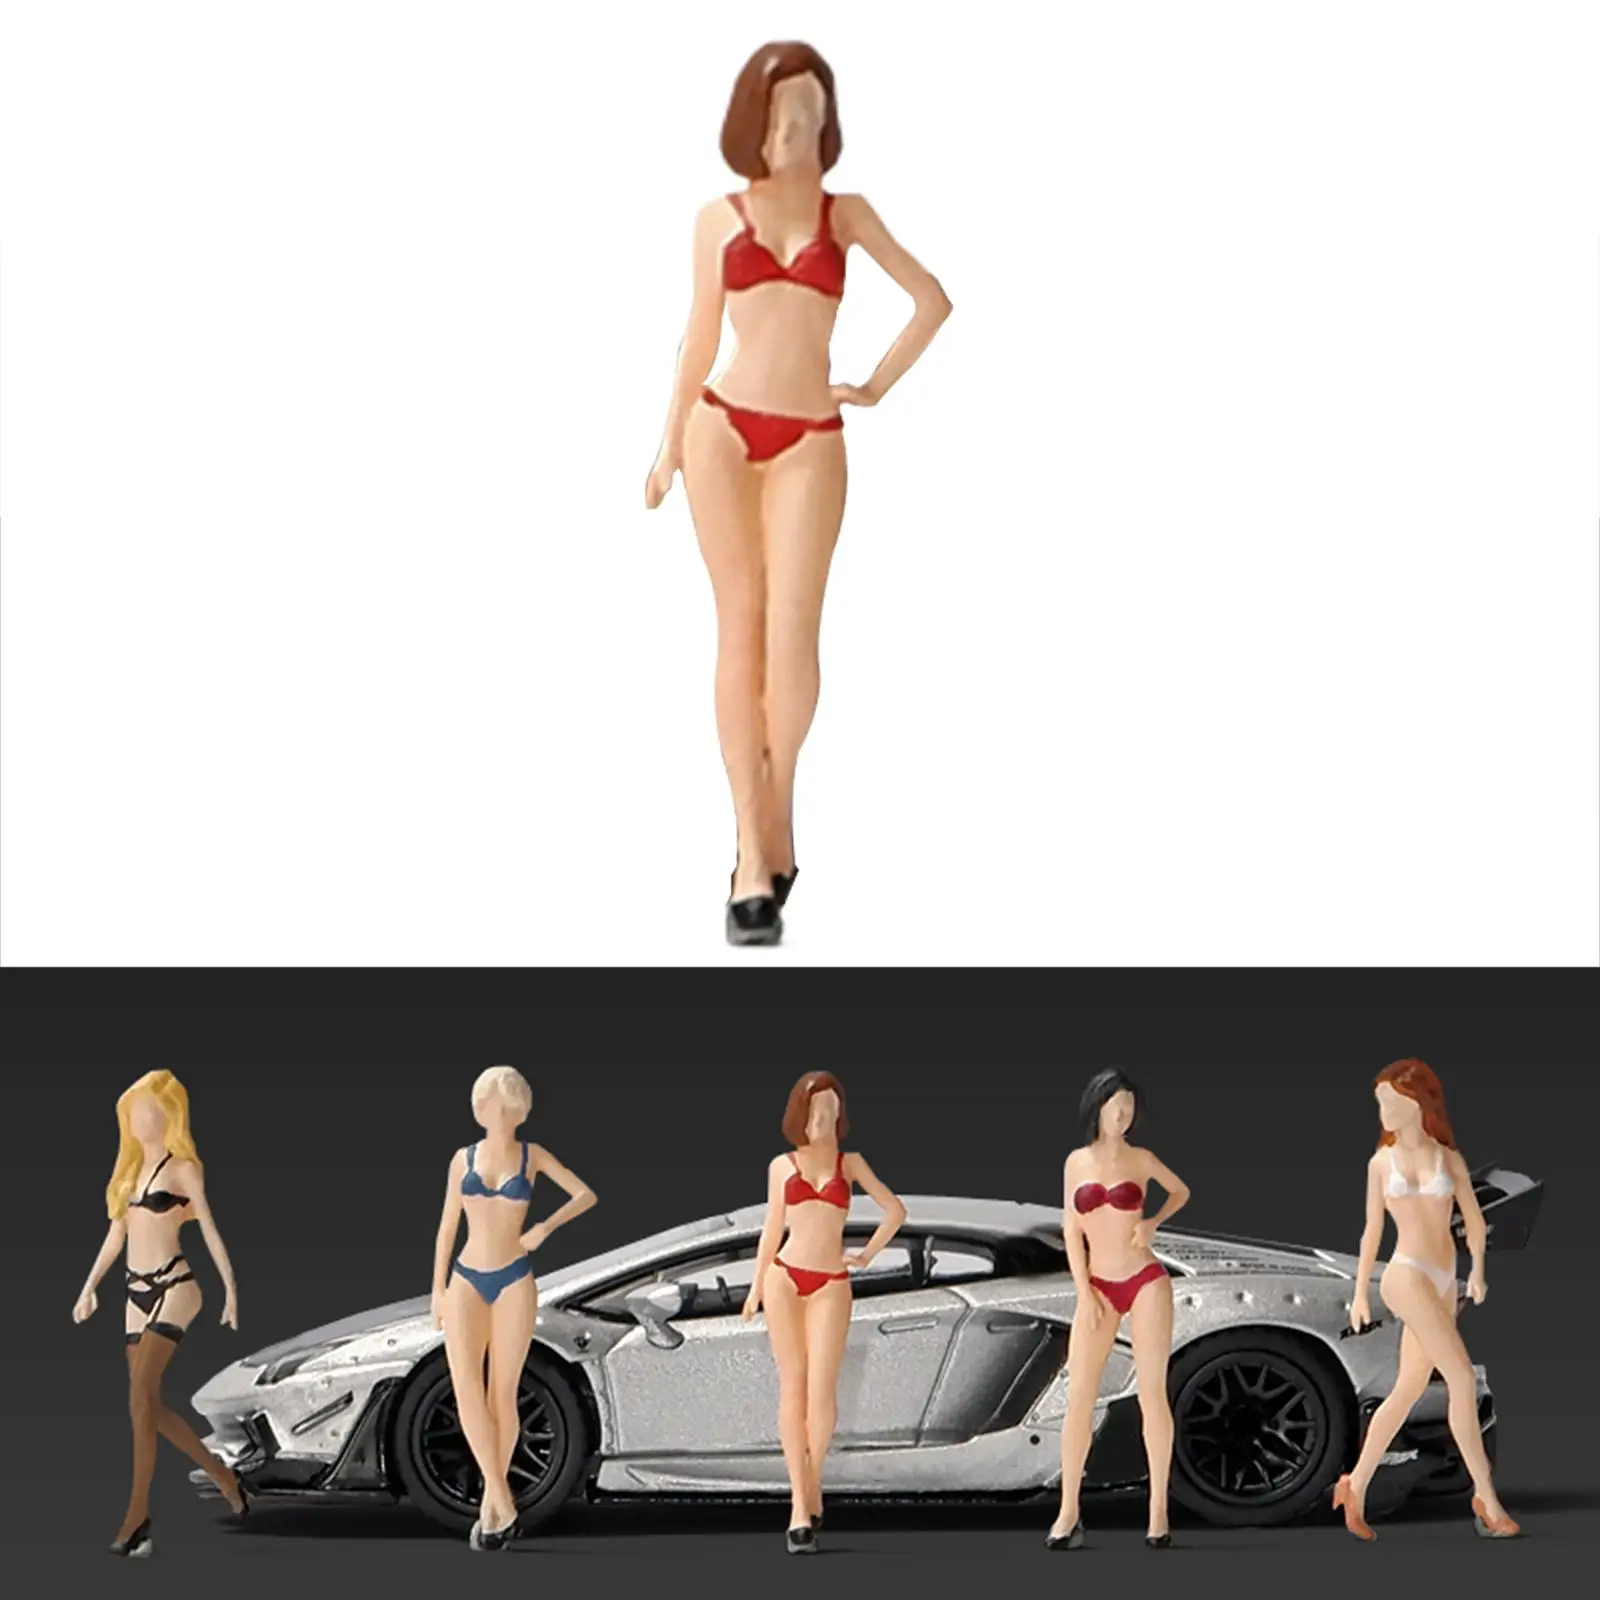 1/64 Scale Models Figurine DIY Layout Scenery Accs 1/64 Scale Model People Figures for DIY Scene Layout